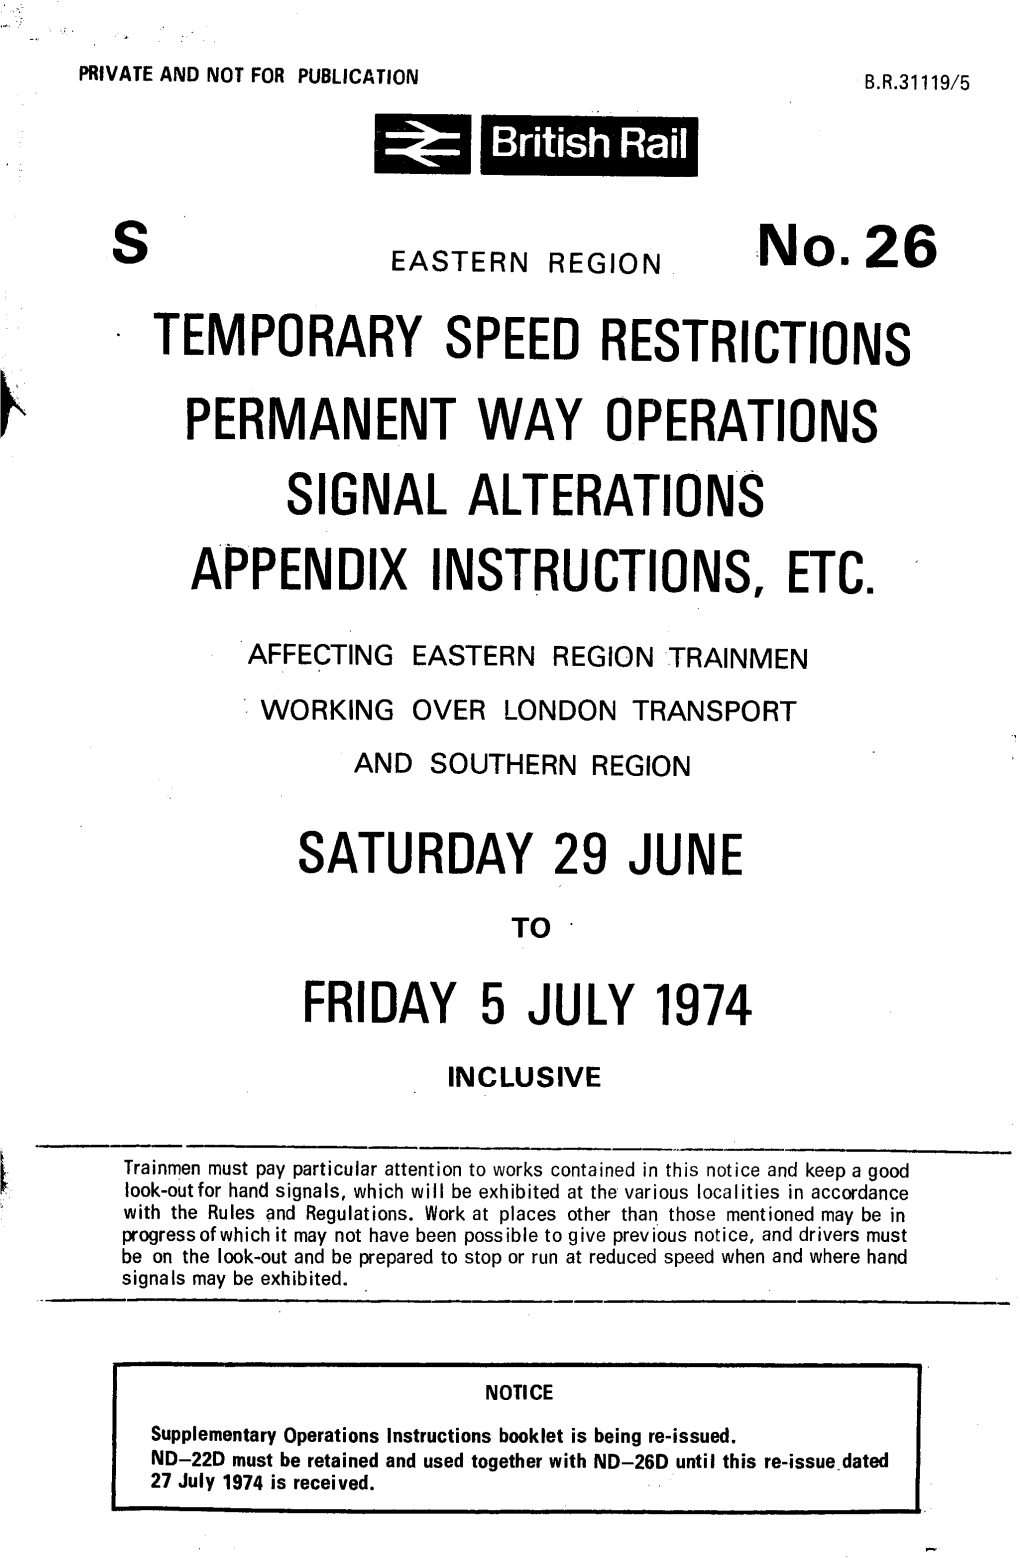 Temporary Speed Restrictions Permanent Way Operations Signal Alterations Appendix Instructions, Etc